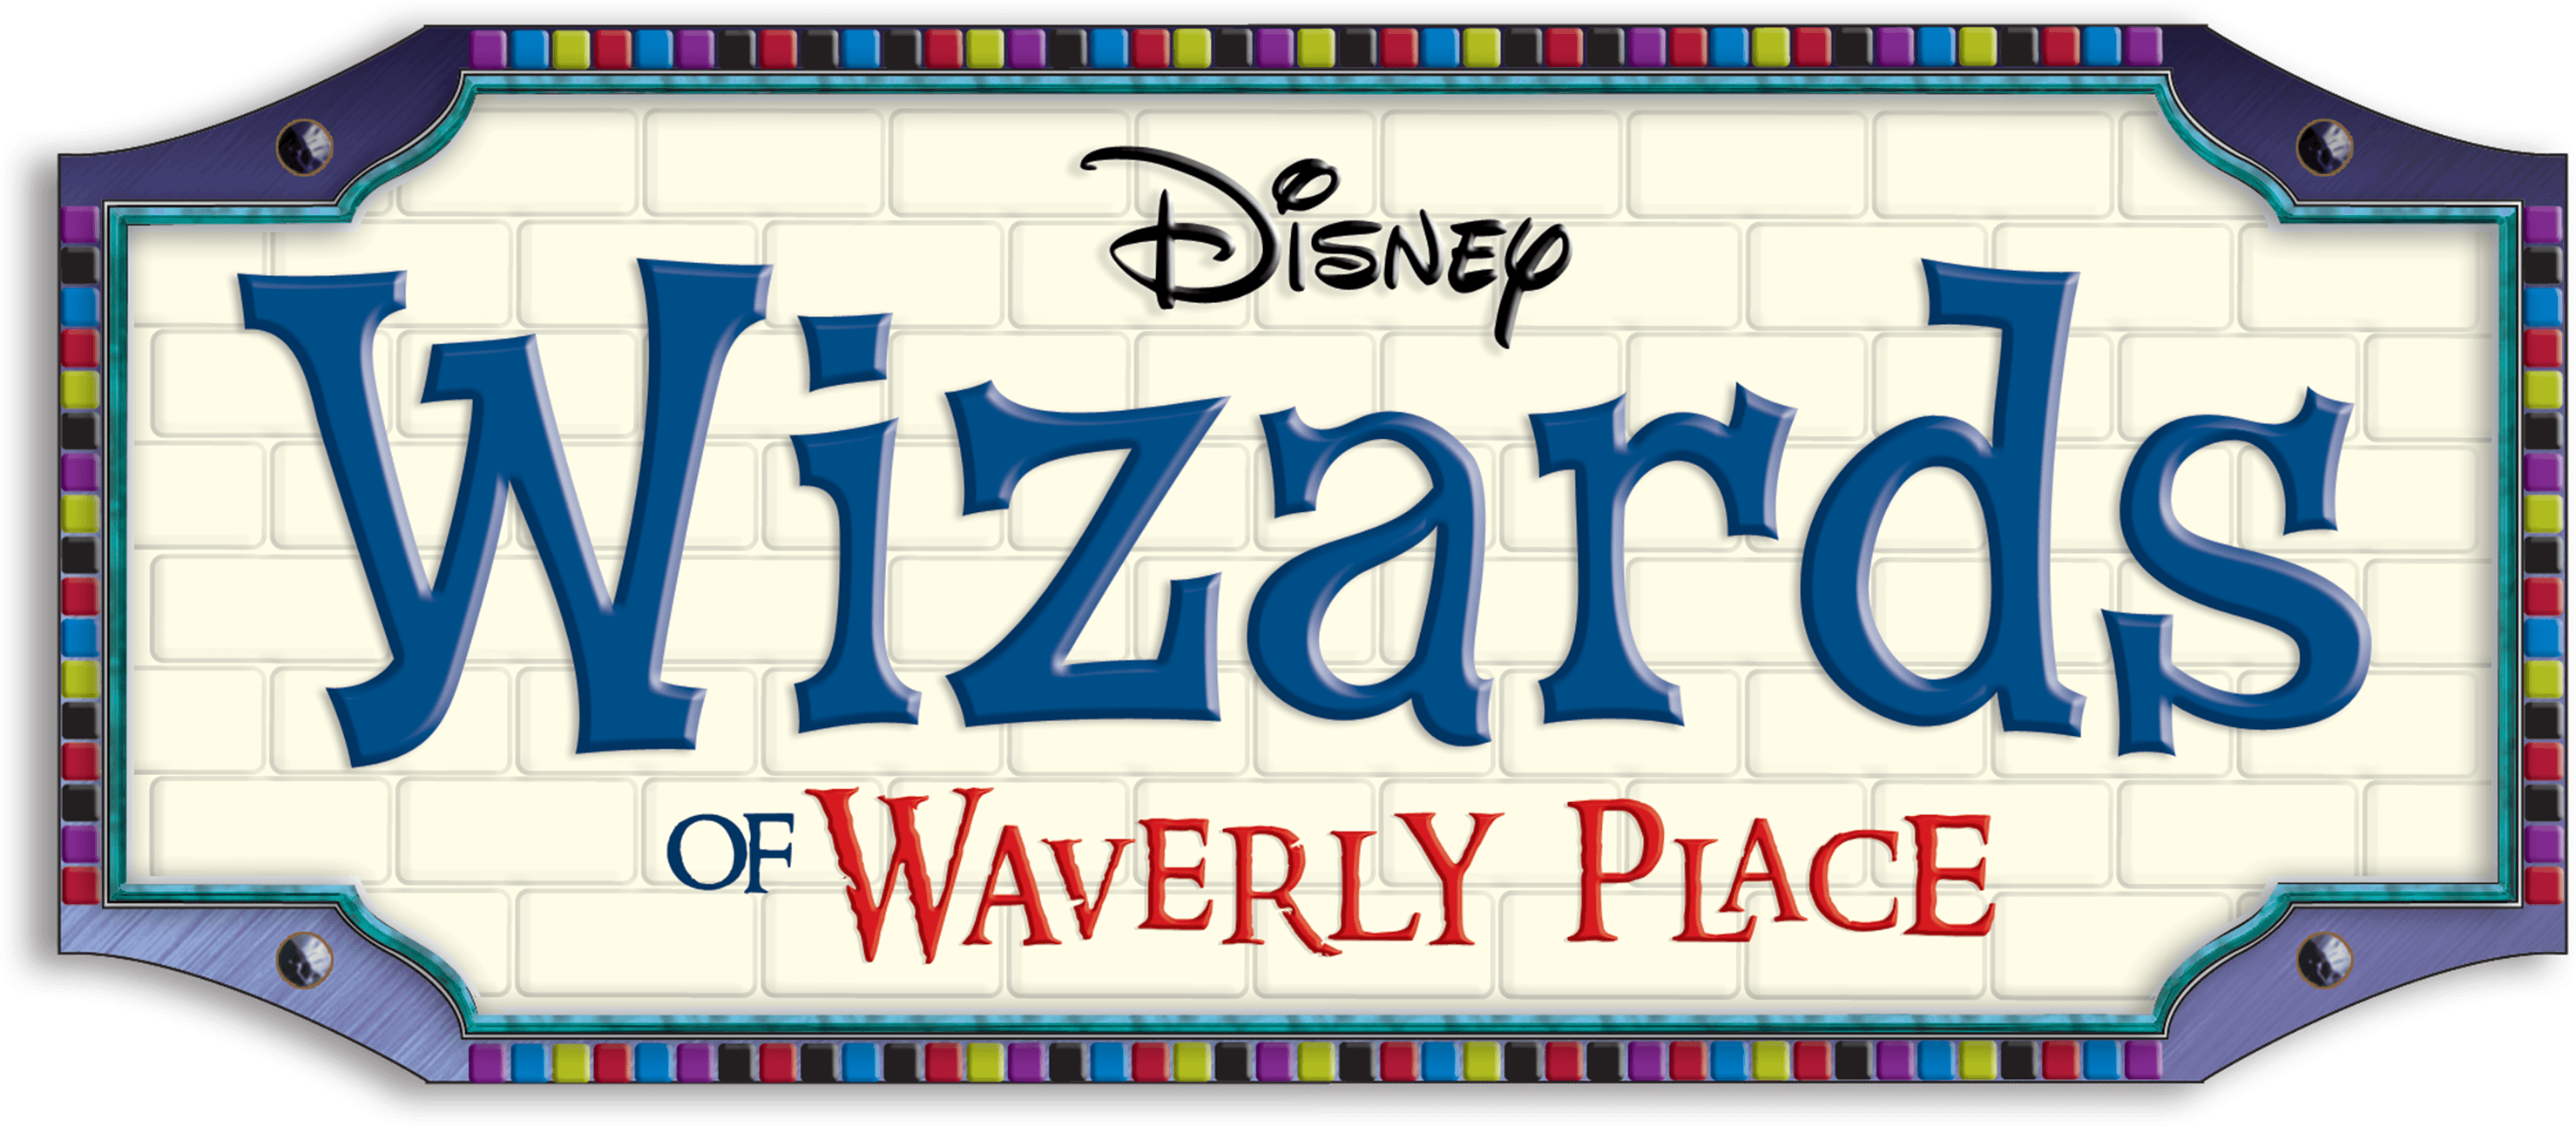 Wizards of Waverly Place logo